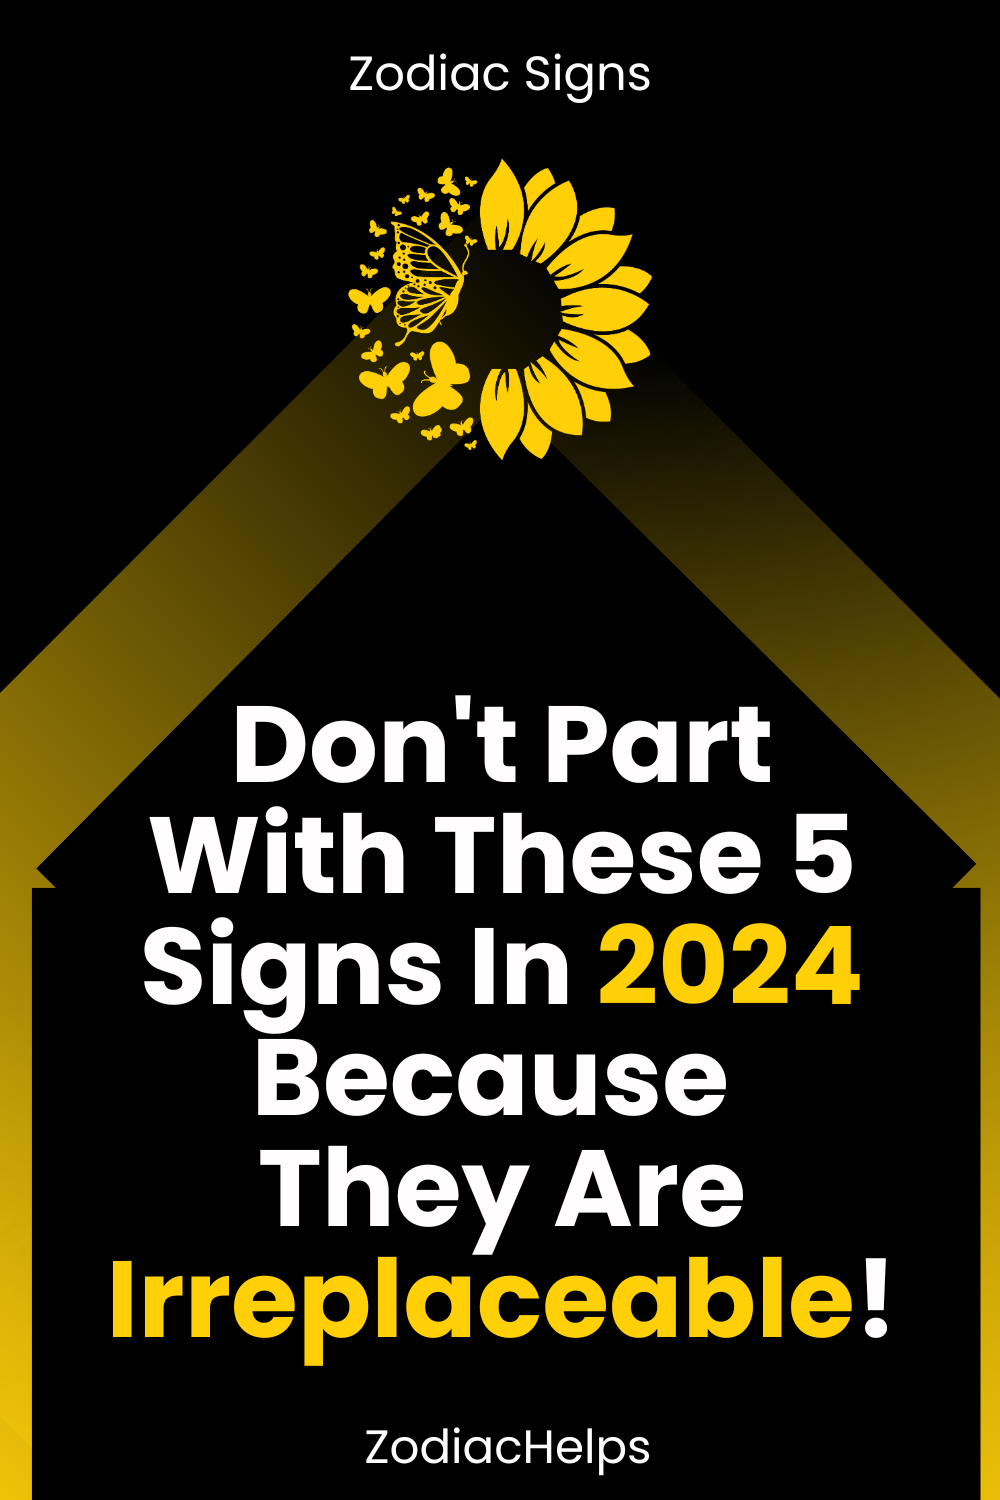 Don't Part With These 5 Signs In 2024 Because They Are Irreplaceable!